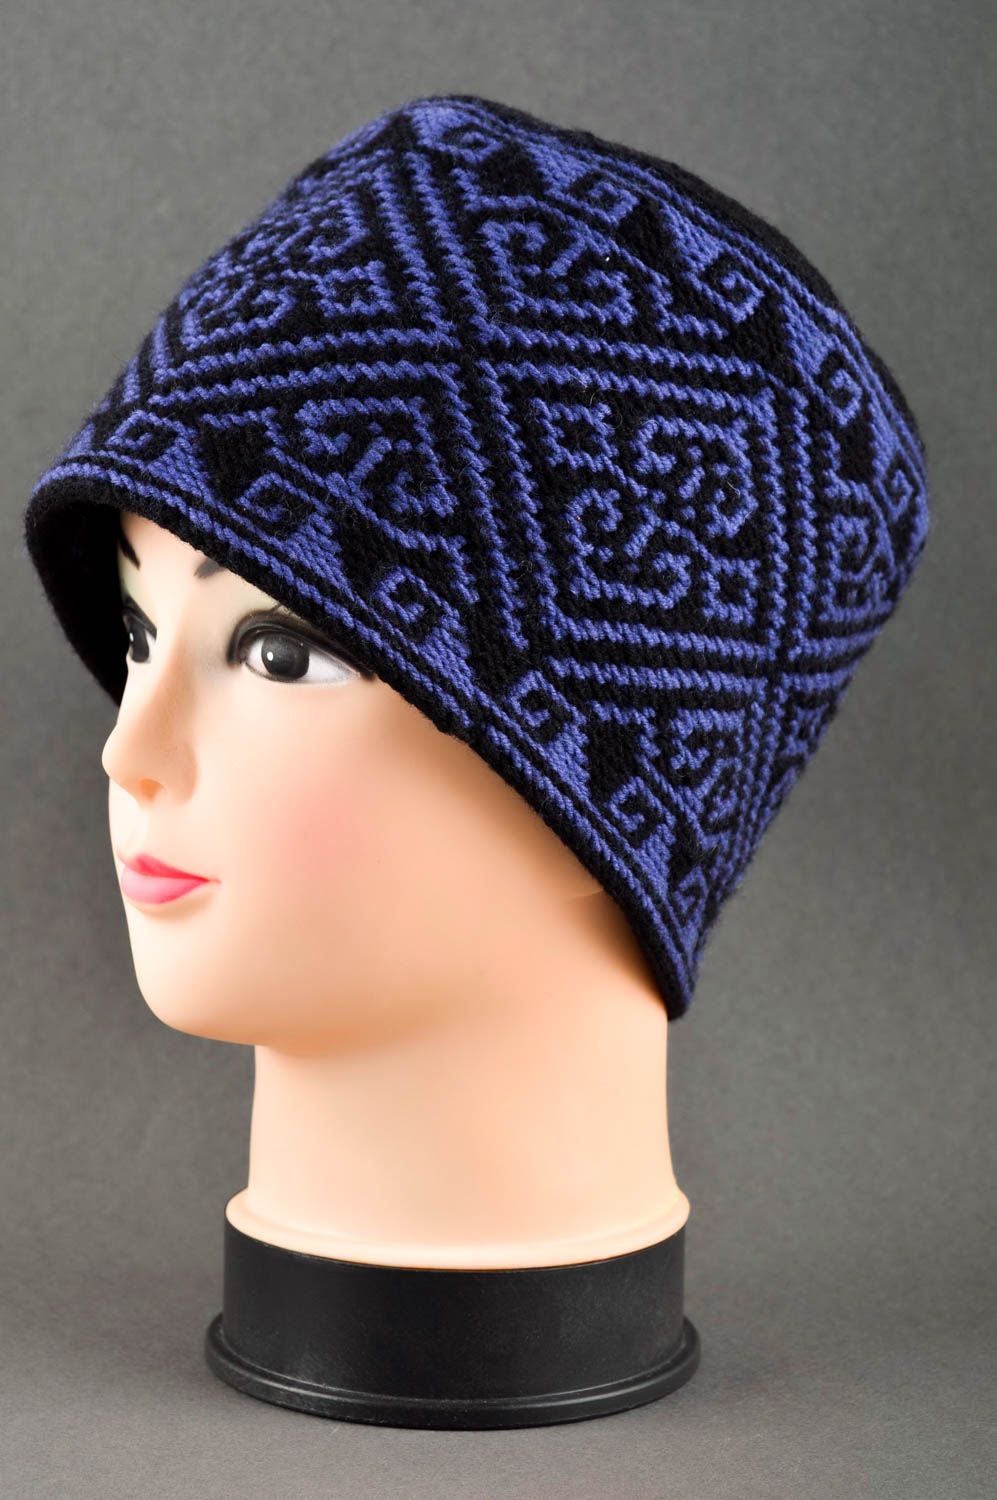 Handmade knitted hat warm hat head accessories for men unusual gift ideas photo 1